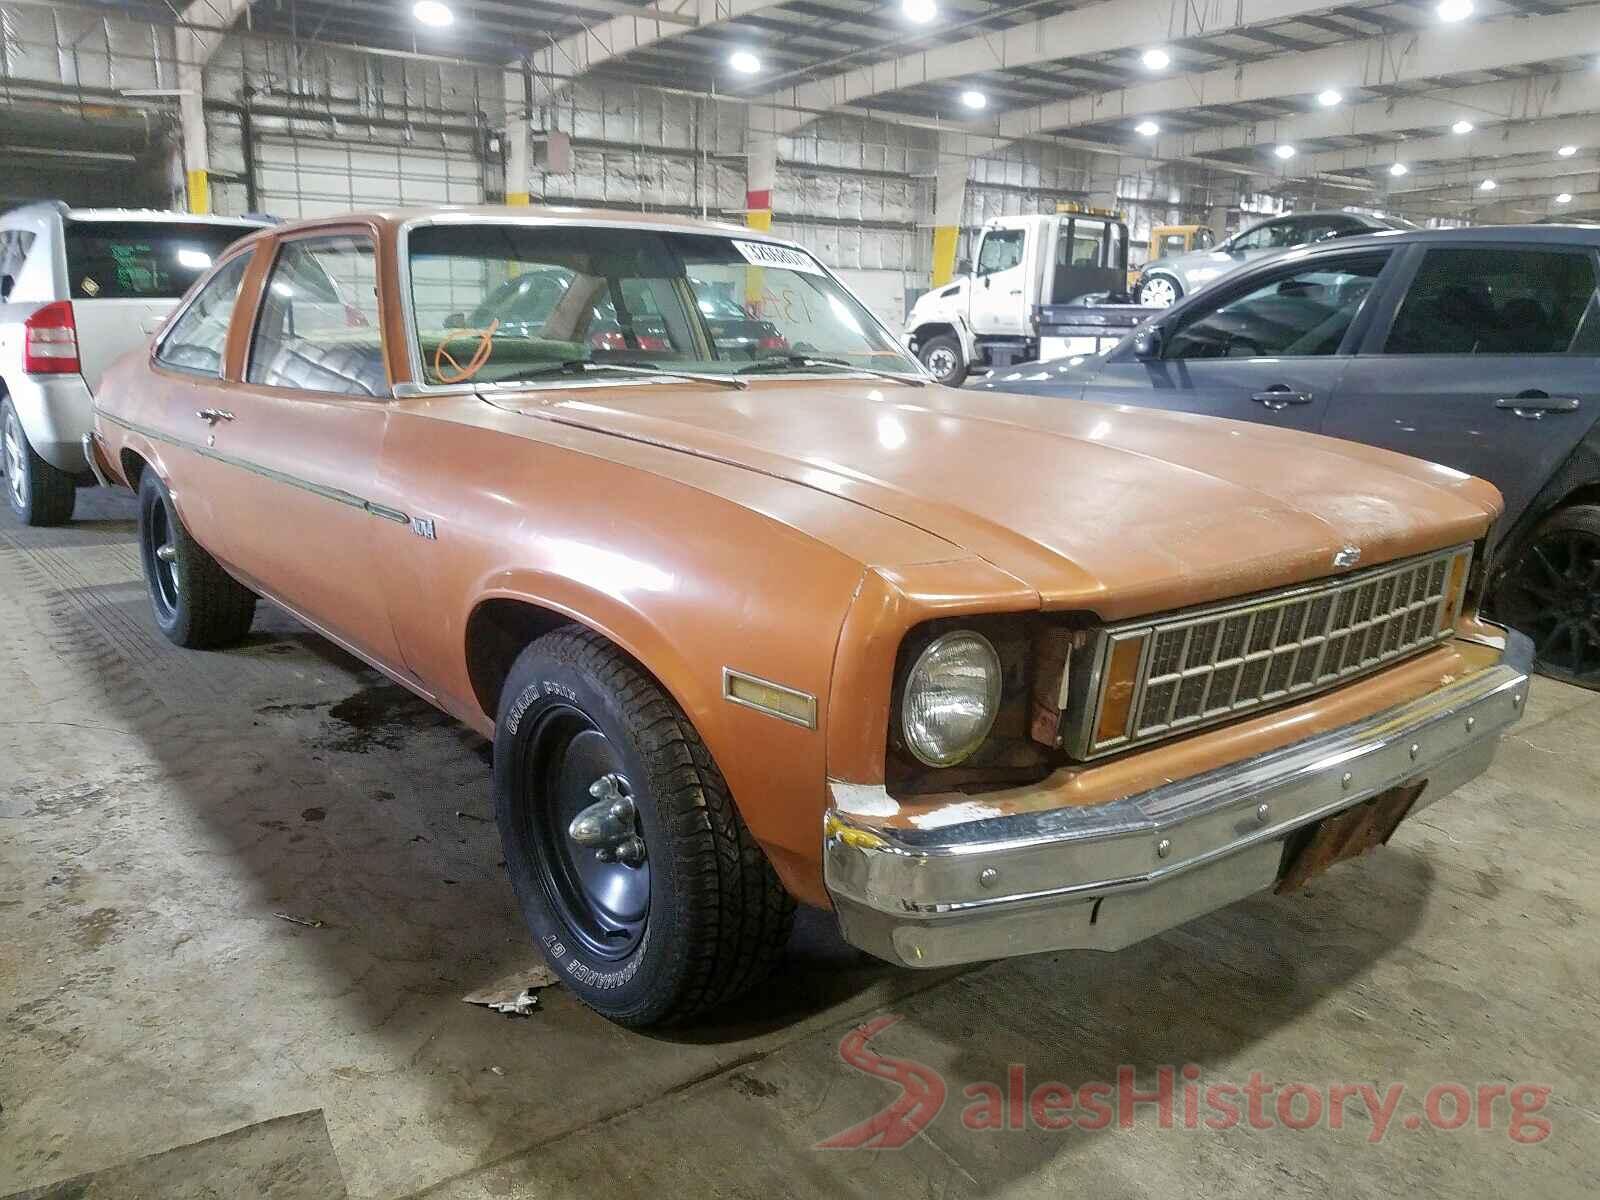 1X27D8W174718 1967 CHEVROLET ALL OTHER